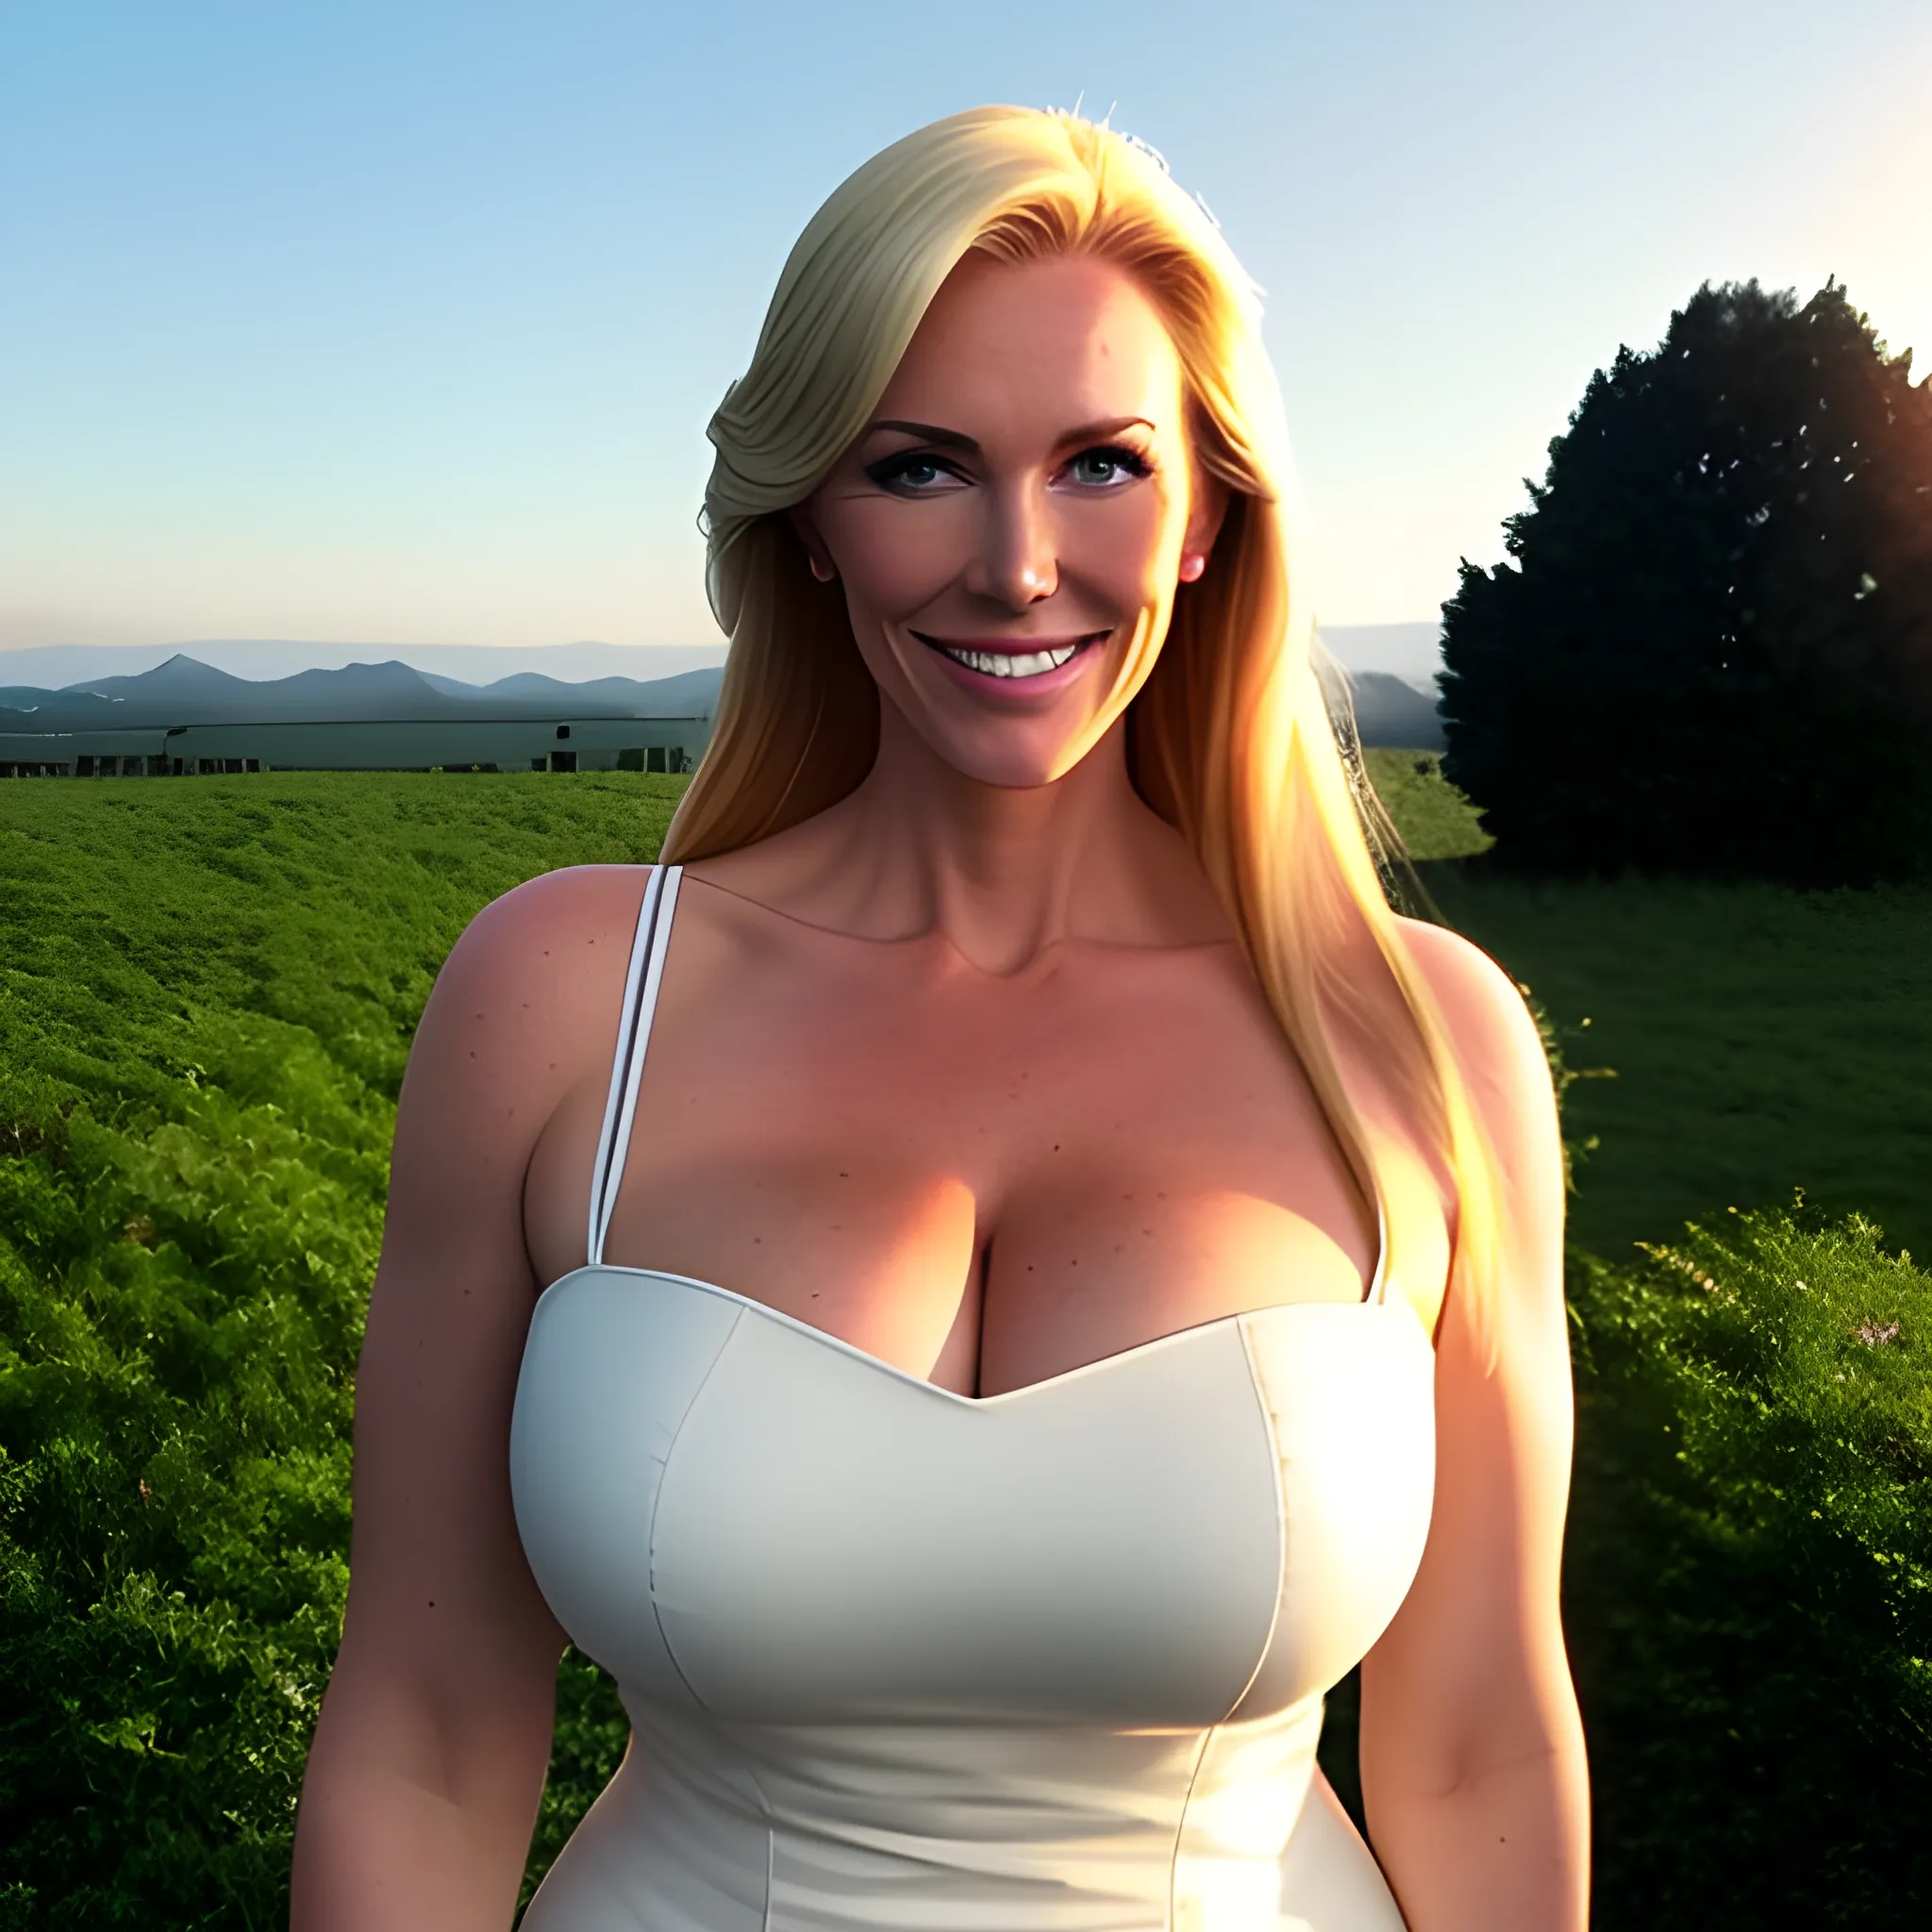 very tall, robust, straightbodied, not curvy at all, gently smiling blonde girl standing under clouds with rising sun 